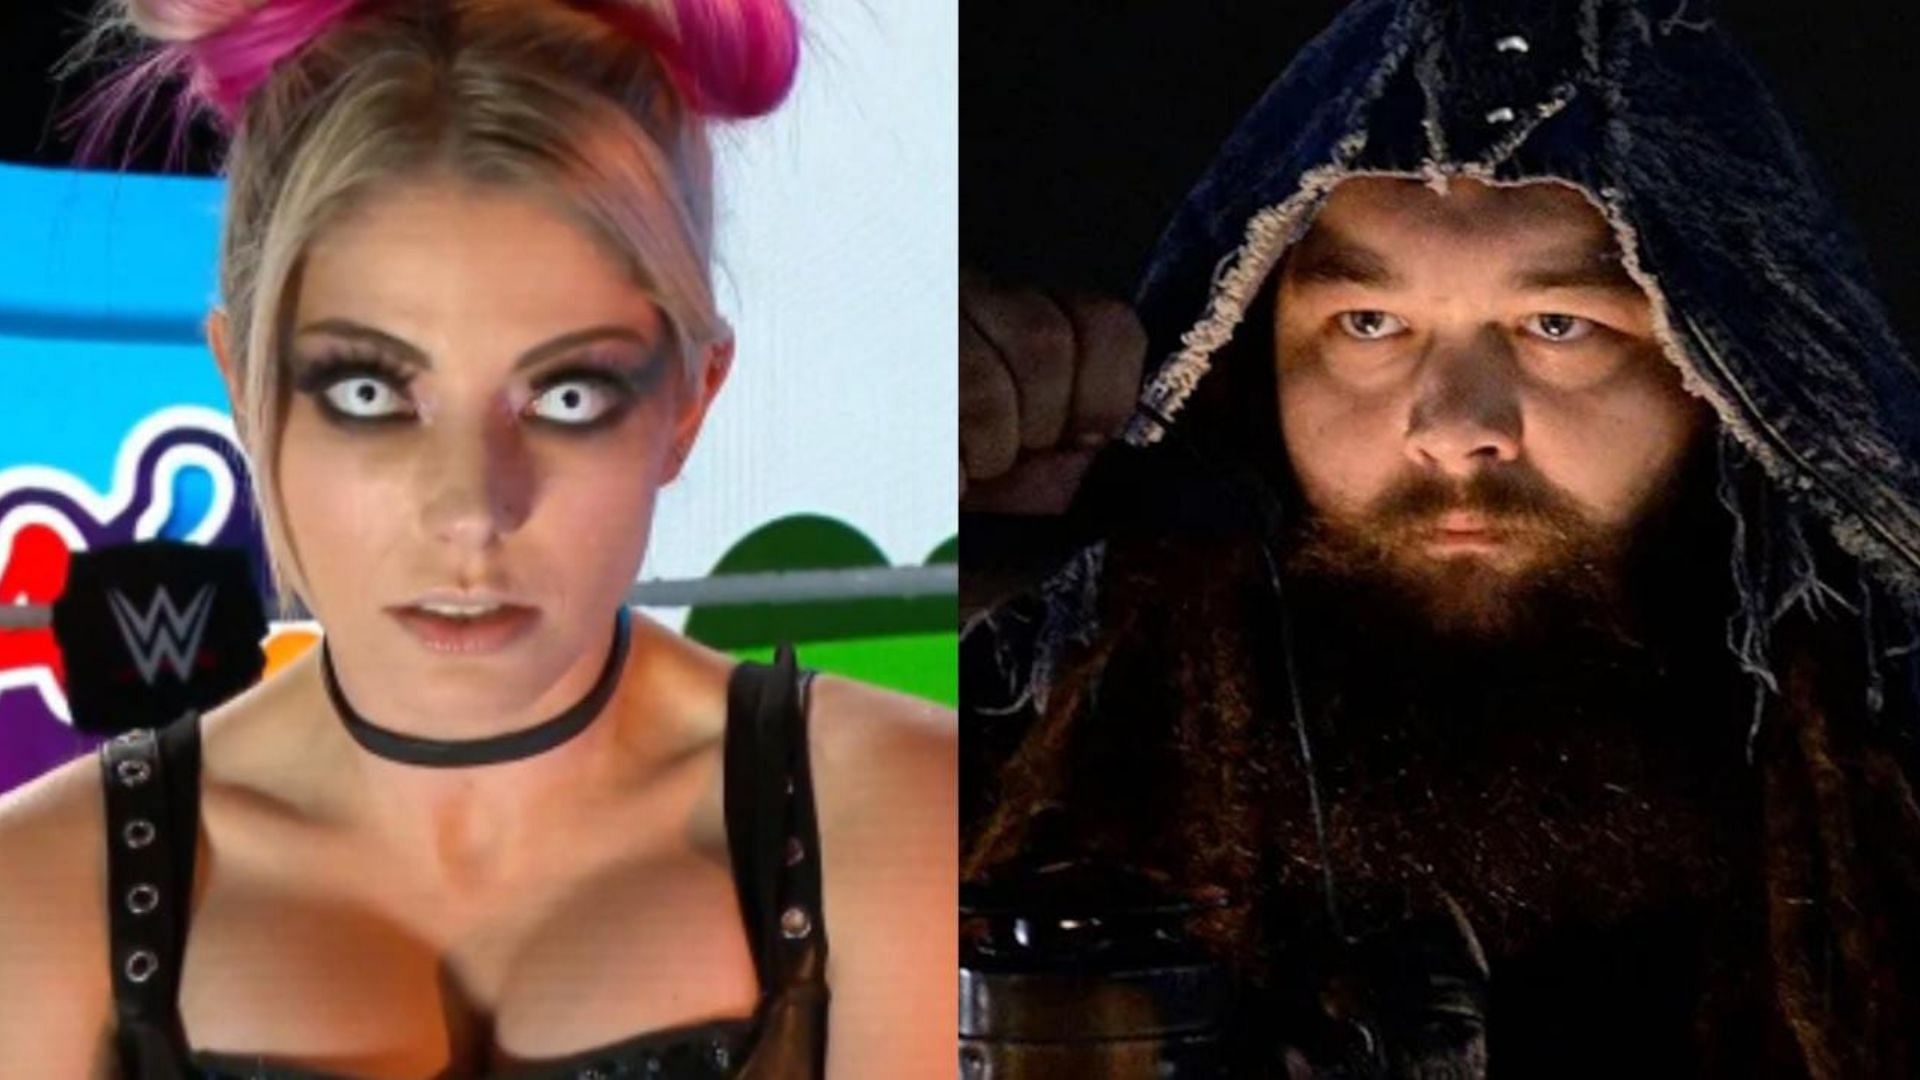 Who should team with Bray Wyatt while Alexa Bliss is away?